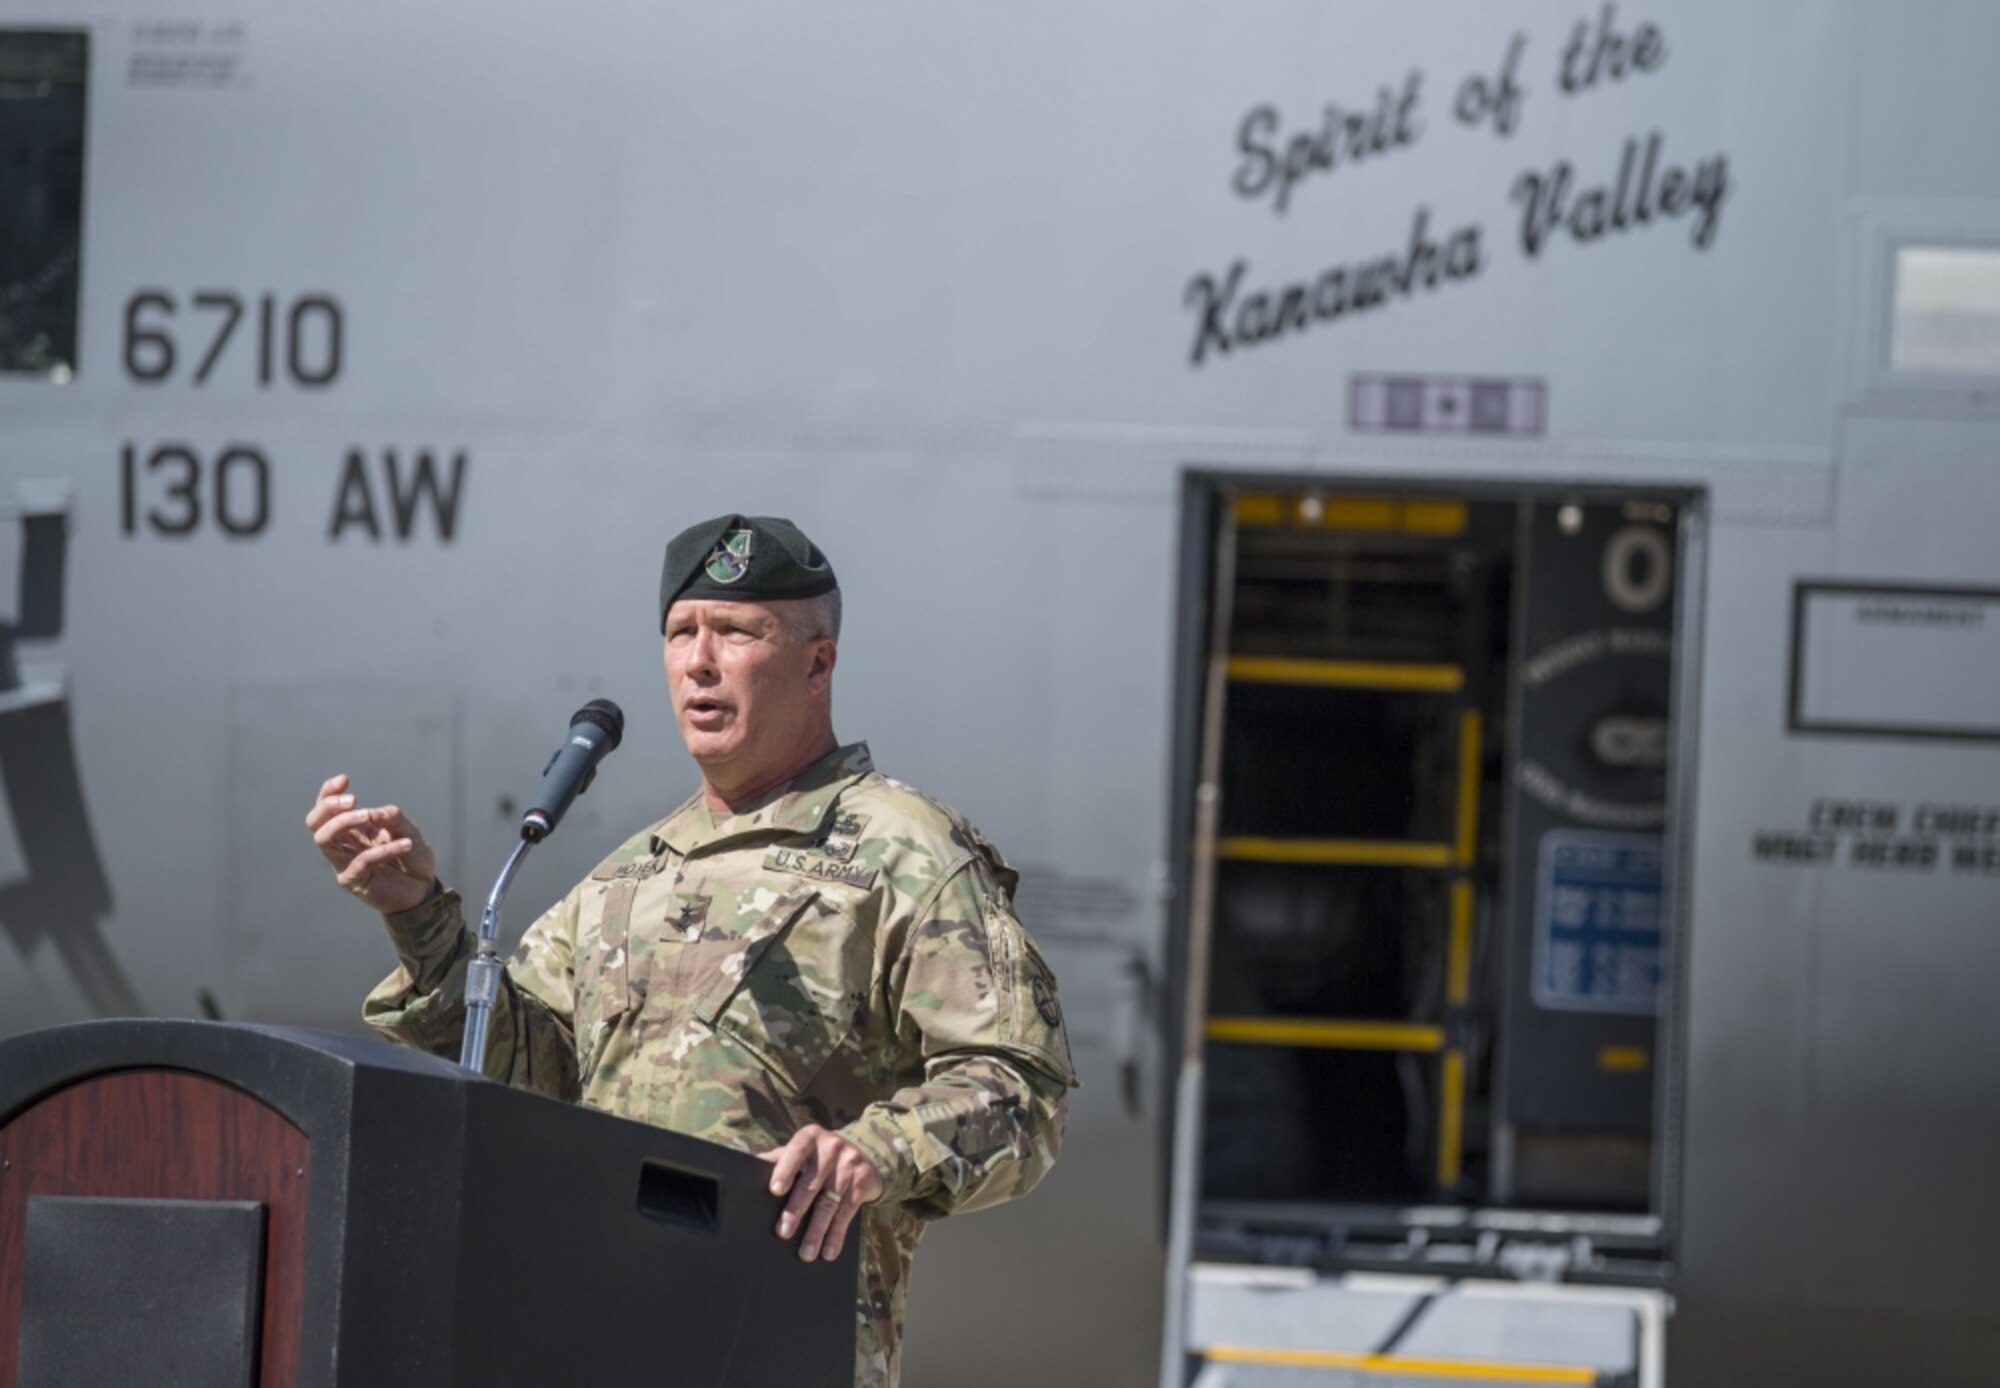 Maj. Gen. James Hoyer, West Virginia National Guard Adjutant General, addresses attendees at an aircraft naming ceremony held June 9, 2017 at McLaughlin Air National Guard Base, Charleston, W.Va. The C-130H aircraft was renamed the “Spirit of the Kanawha Valley” to honor the surrounding community in which the base resides. (U.S. Air National Guard photo by Tech. Sgt. De-Juan Haley)